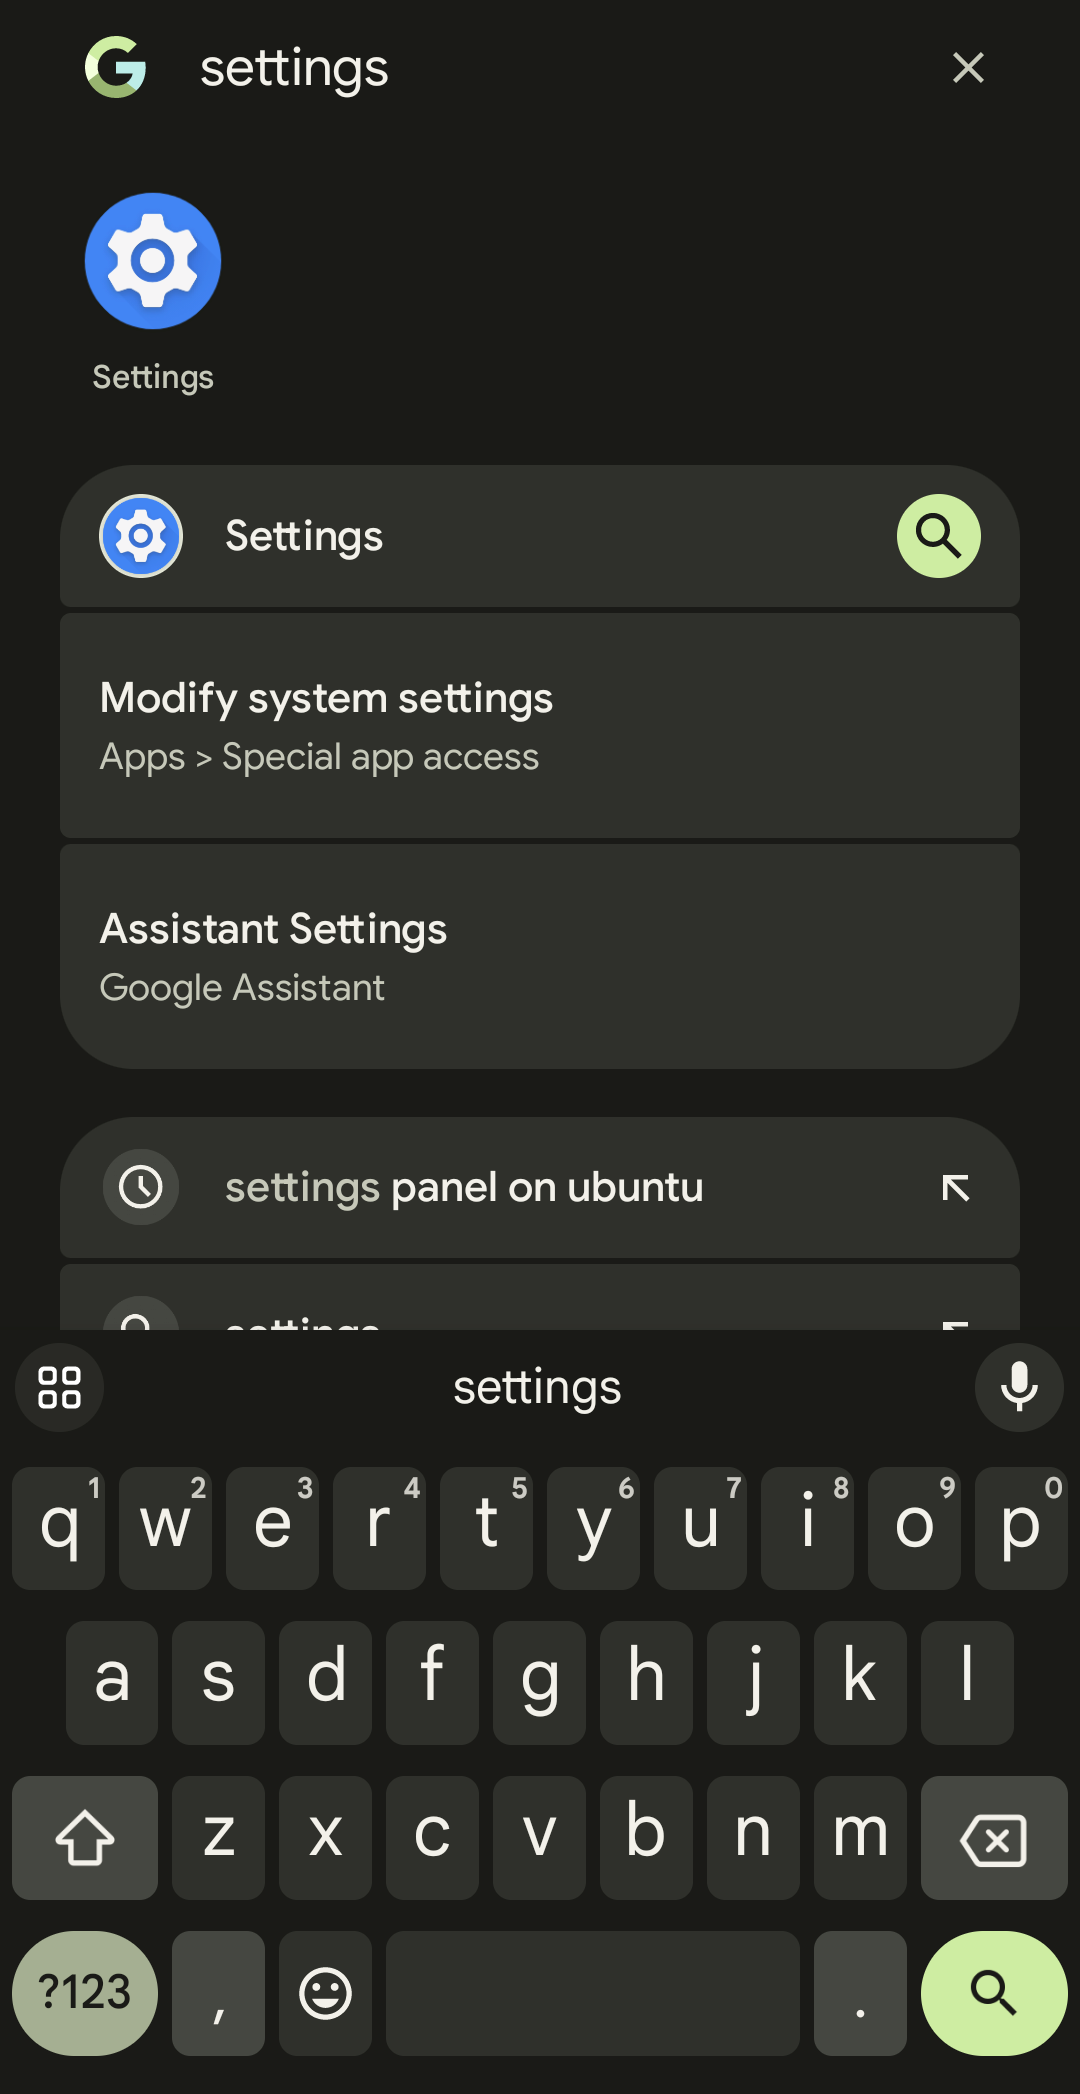 Search for settings